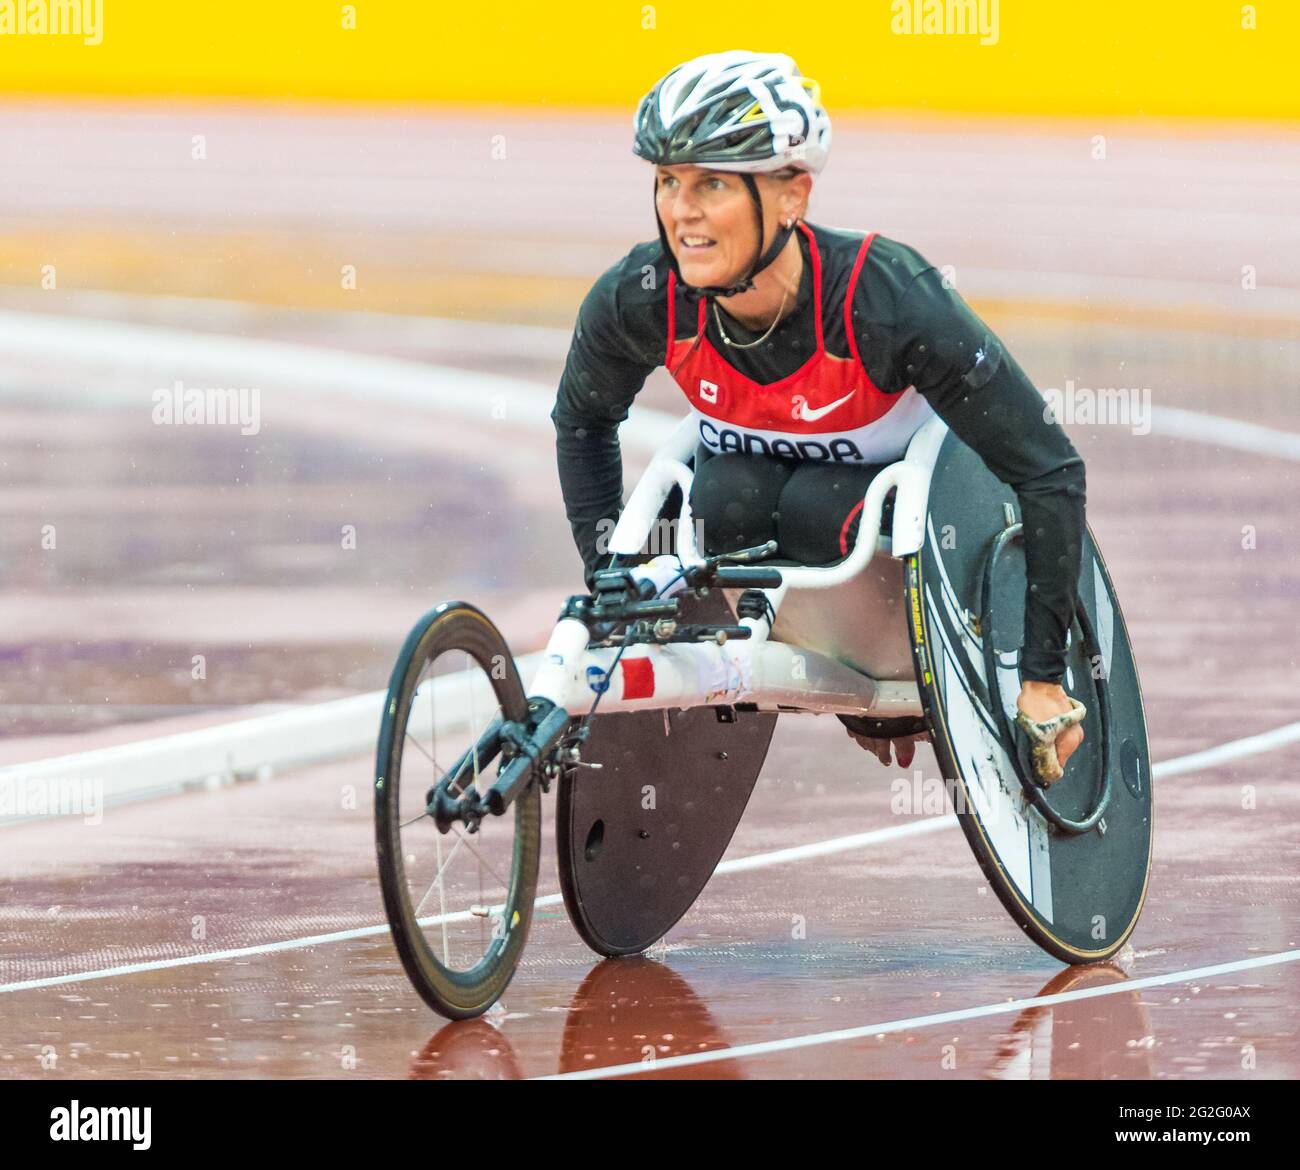 Canadian wheelchair racing athlete racing on a wet track at the 2015 Parapan American Games. The 2015 Parapan American Games commonly known as the Tor Stock Photo